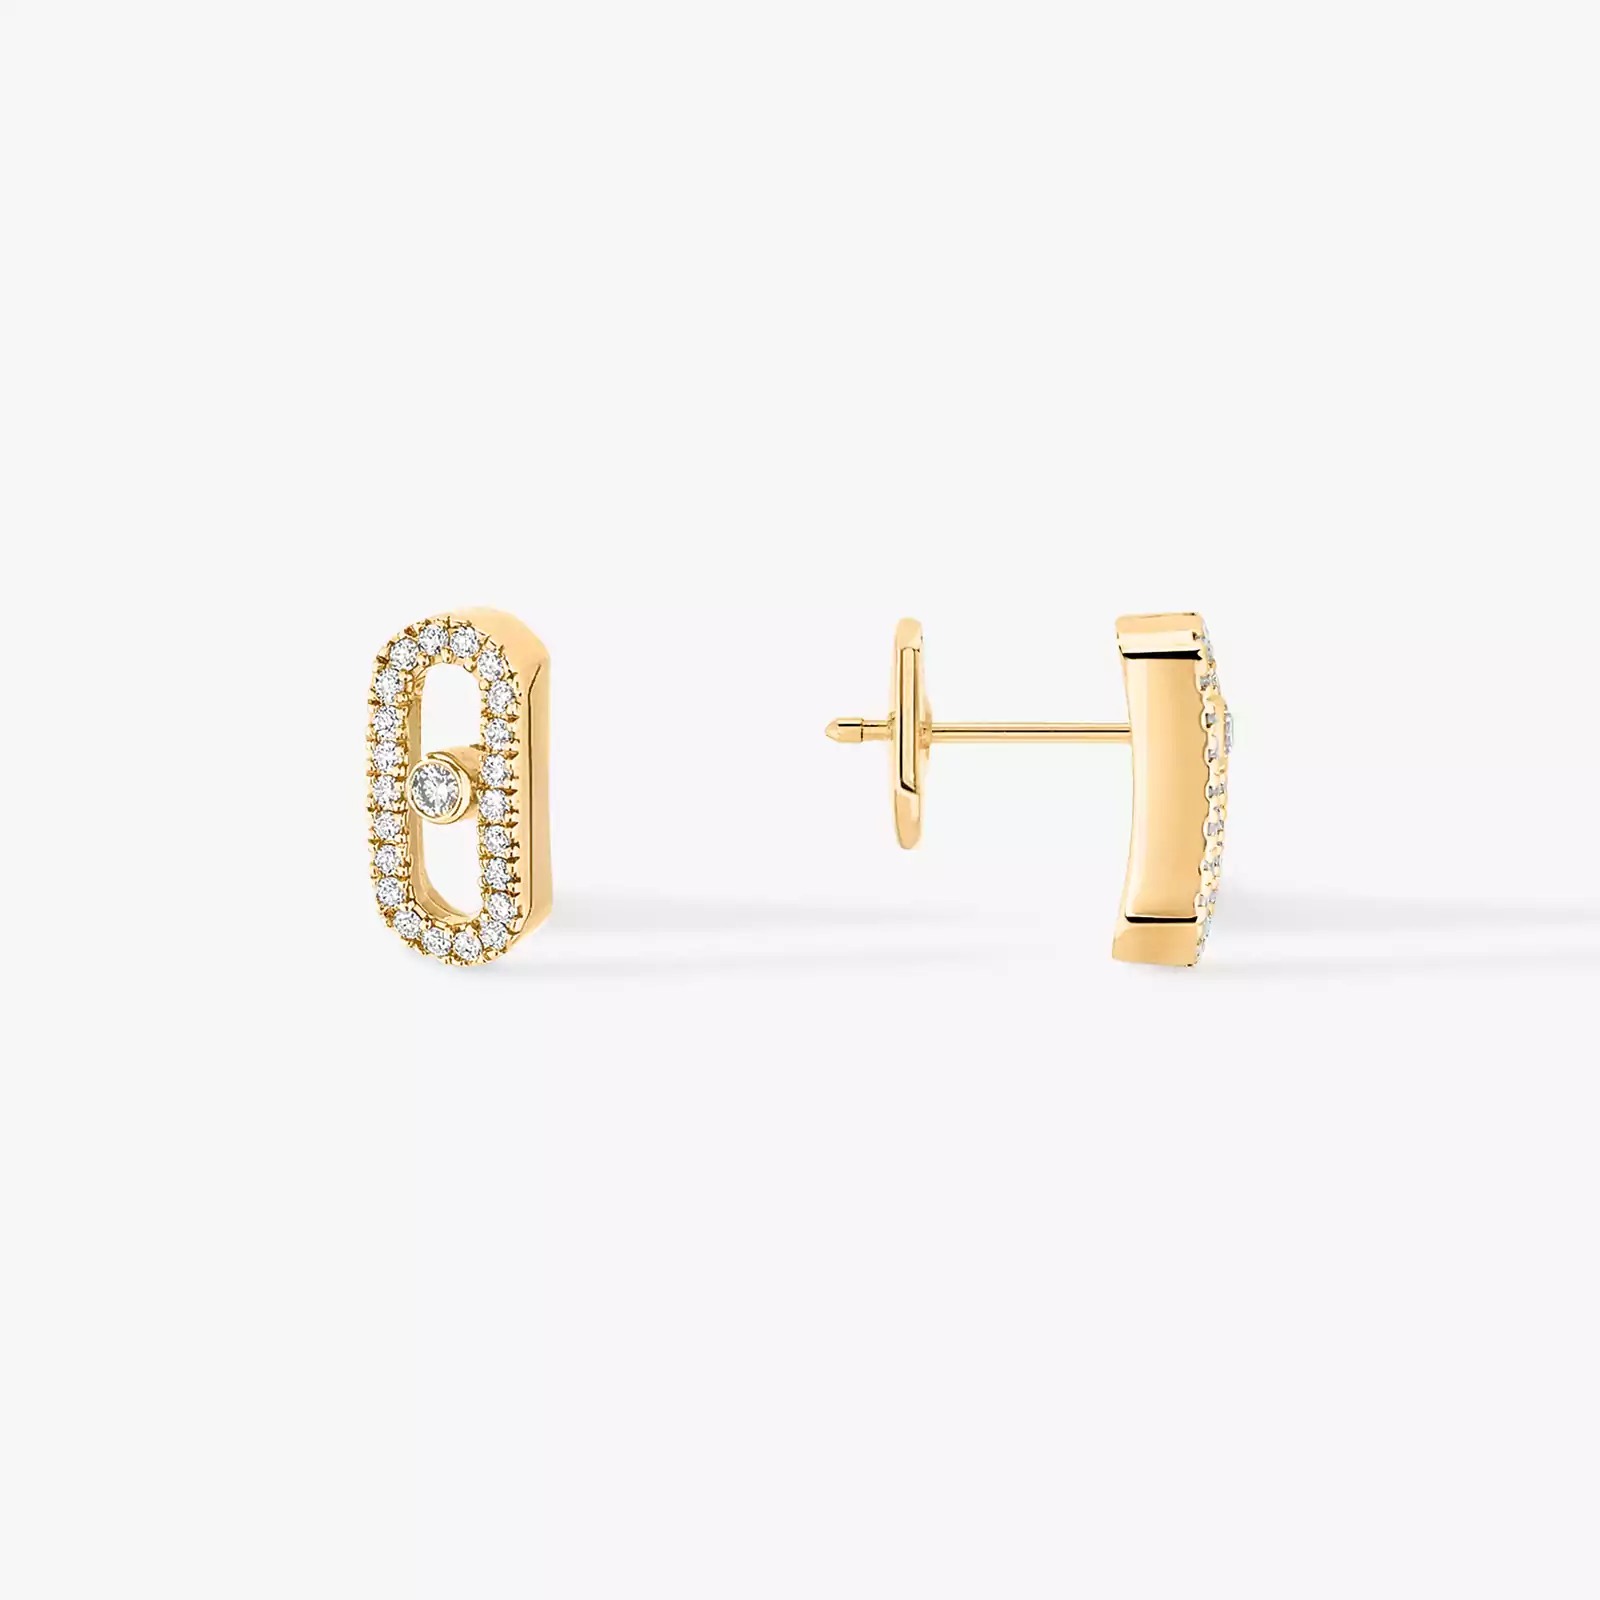 Puces Move Uno Yellow Gold For Her Diamond Earrings 05634-YG